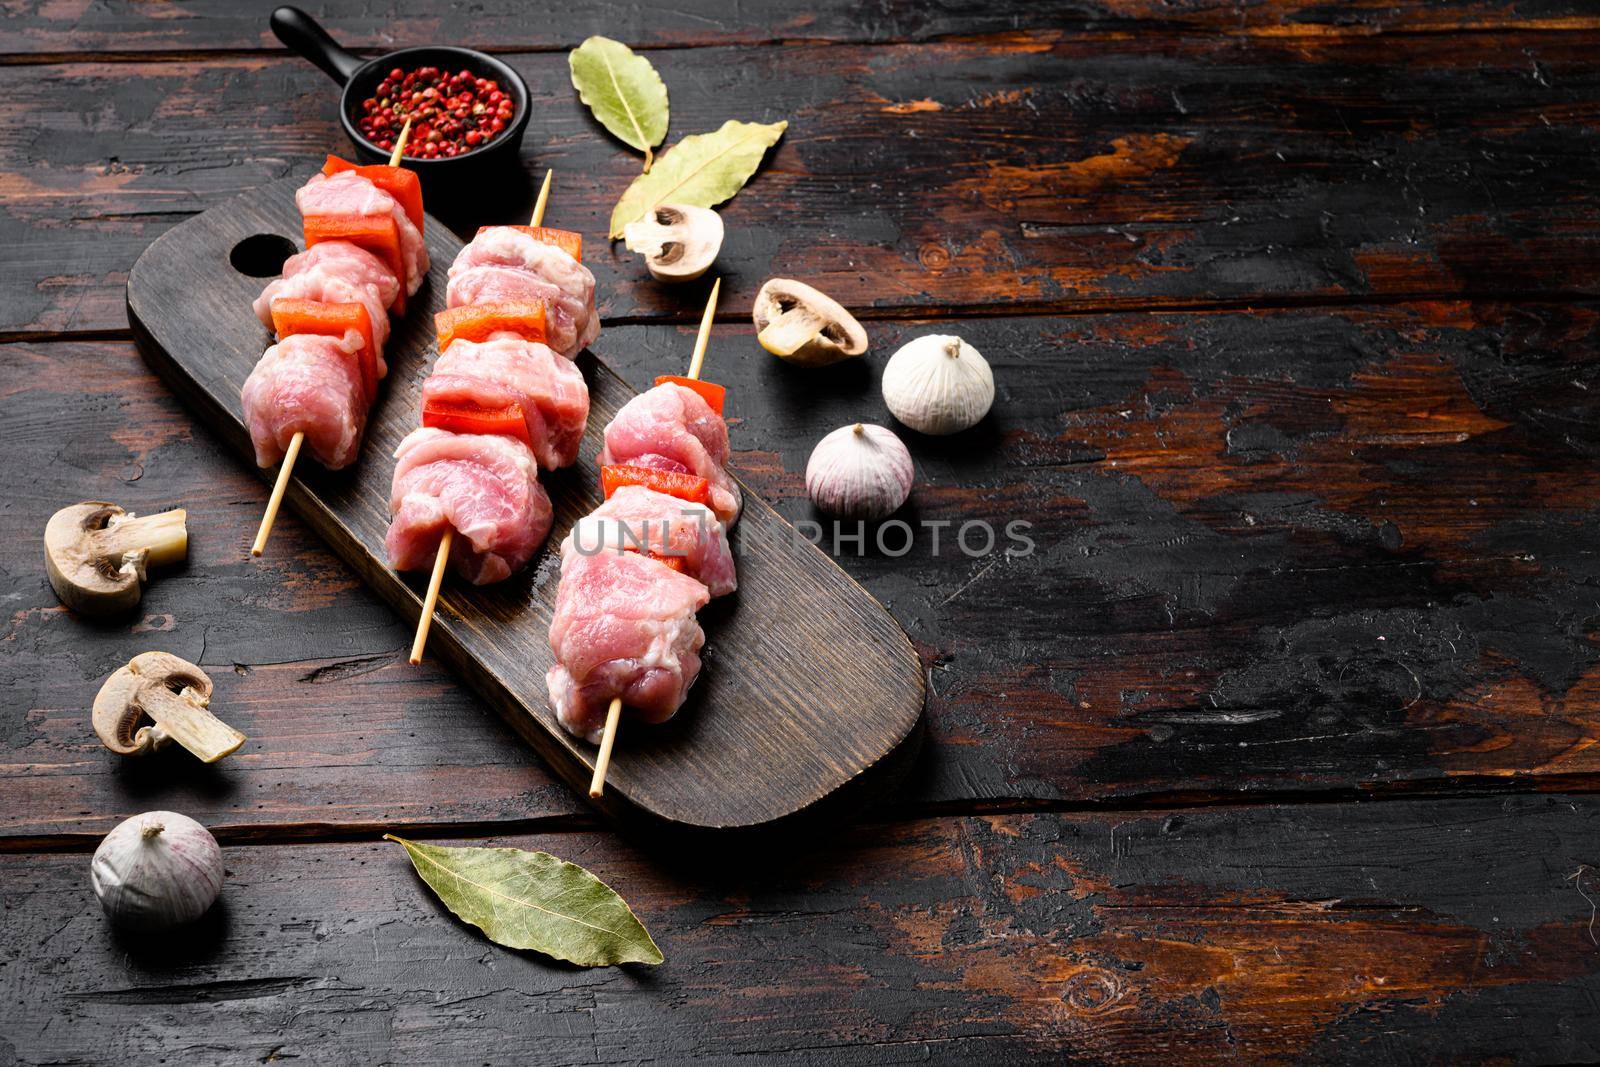 Kebabs raw meat and vegetables on skewers set, with copy space for text, on old dark wooden table background